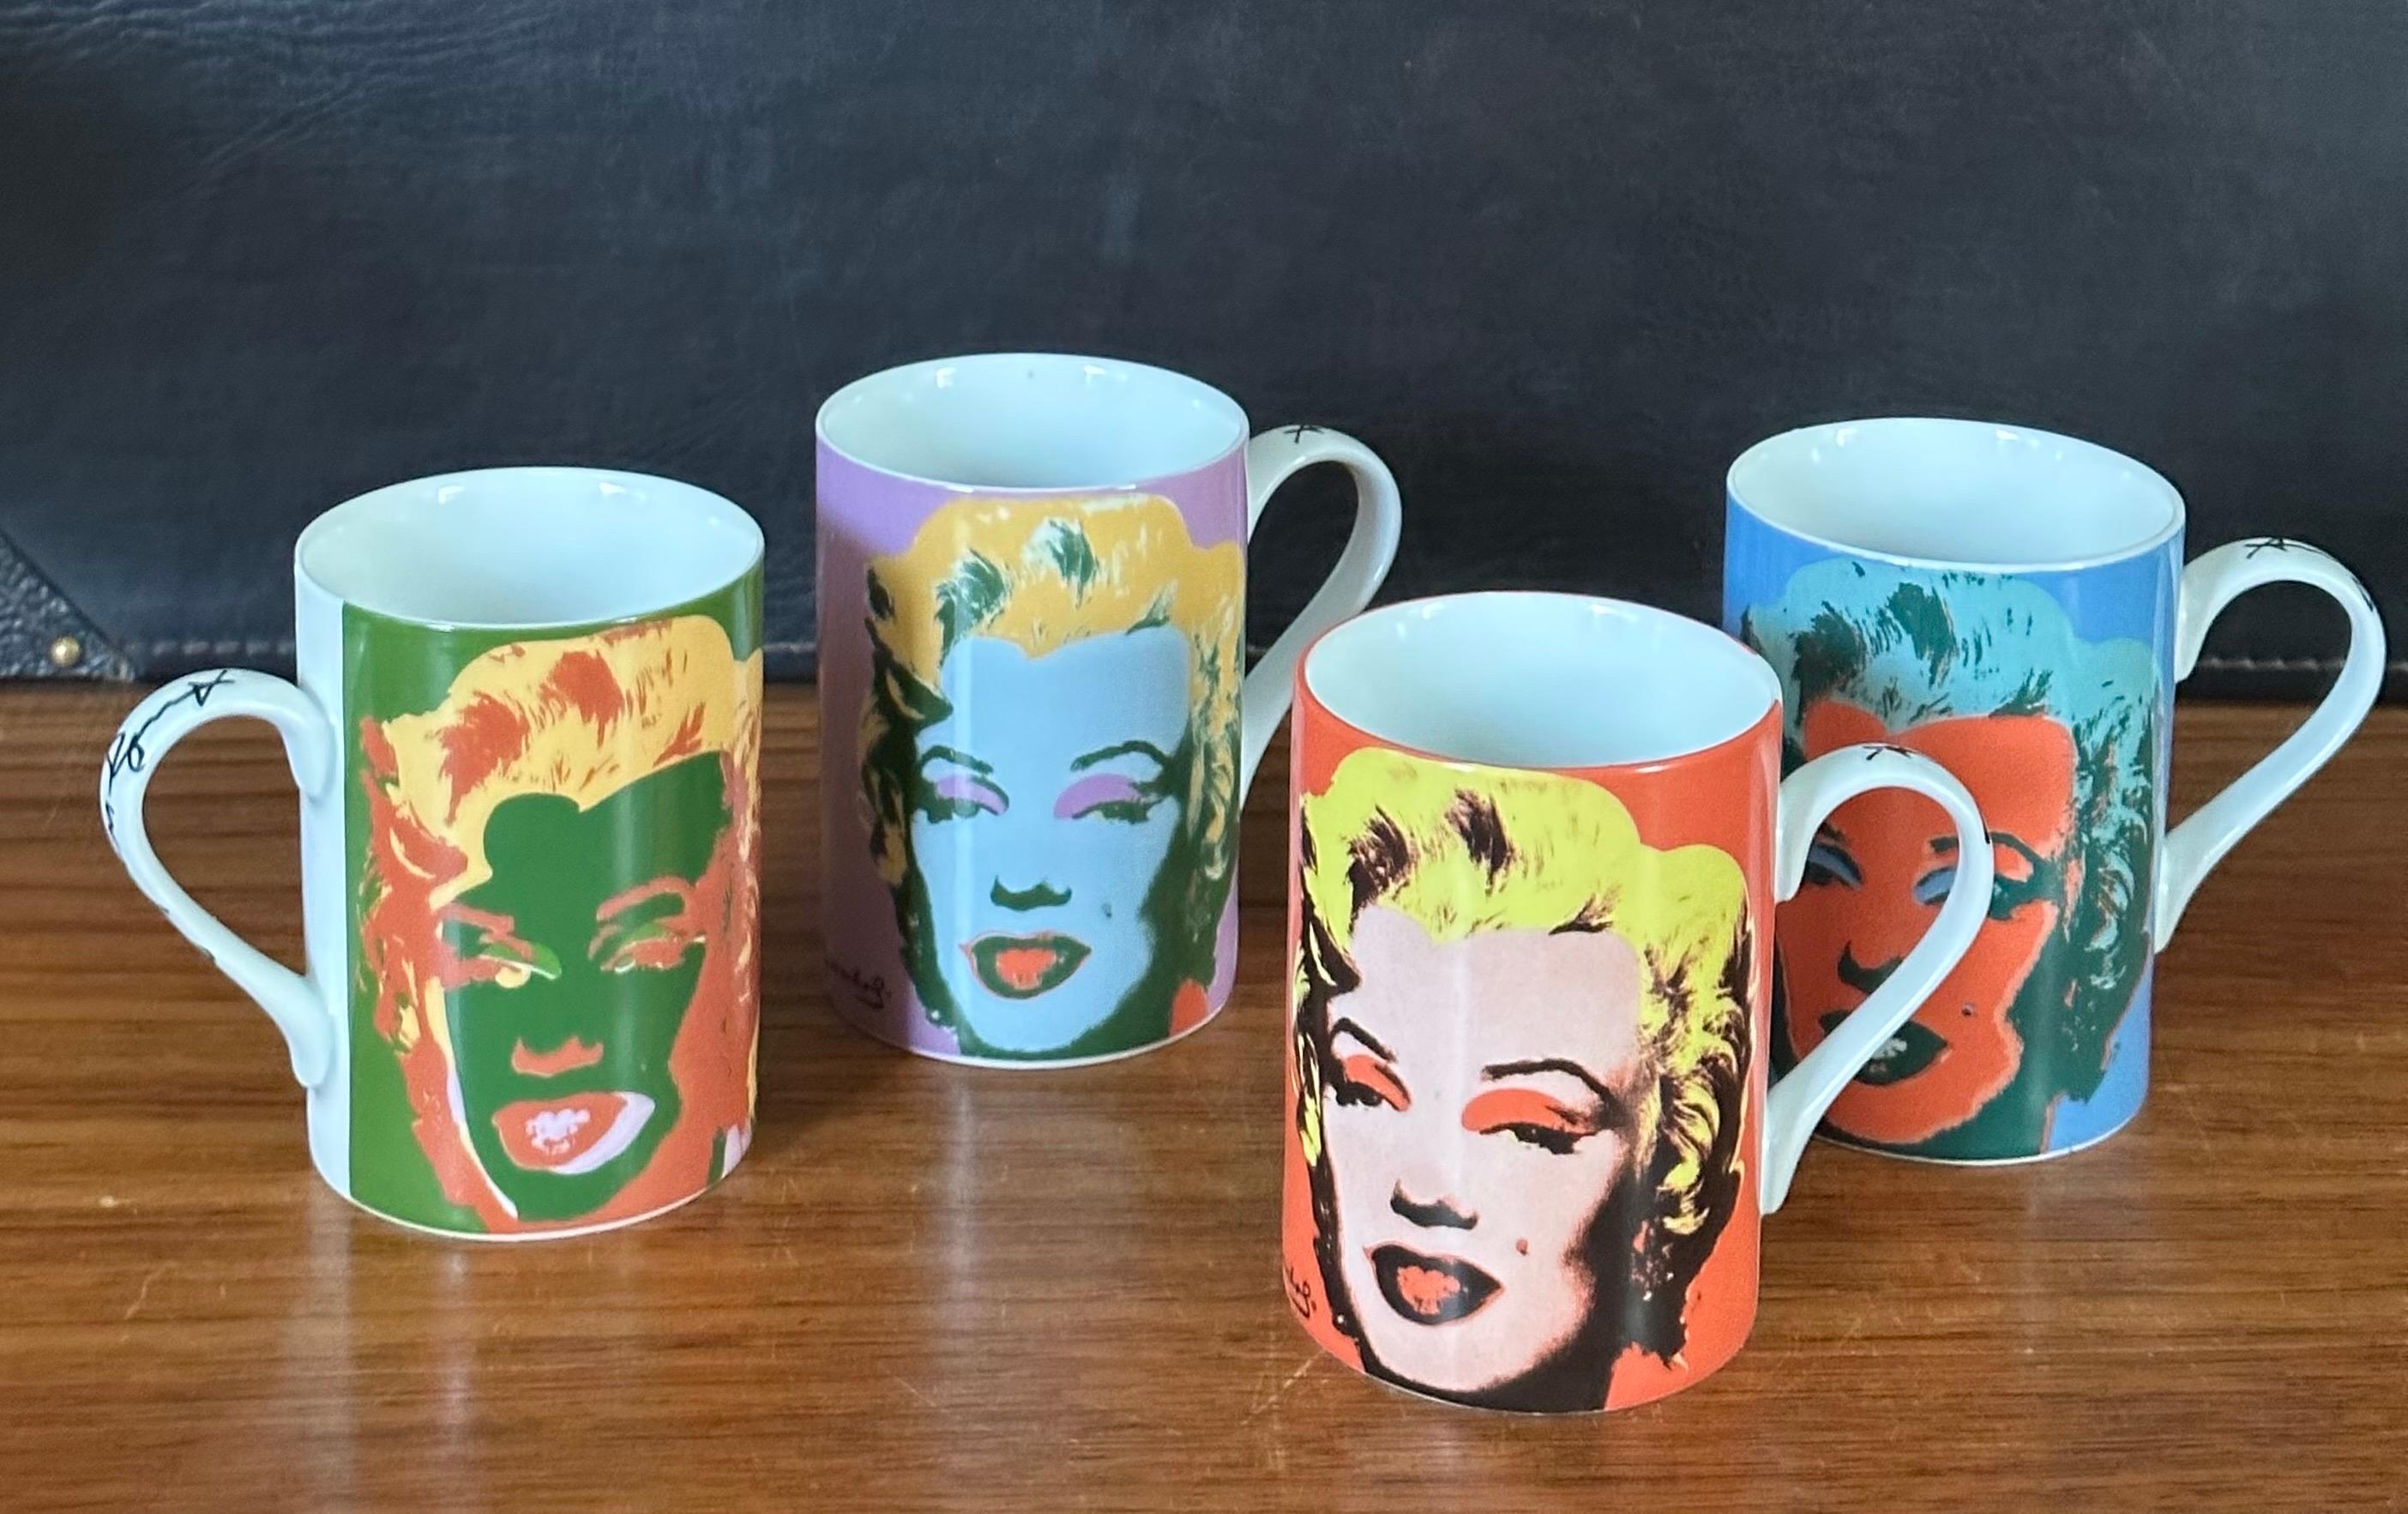 Set of Four Marilyn Monroe Ceramic Coffee Mugs in Box by Andy Warhol for Block  For Sale 2